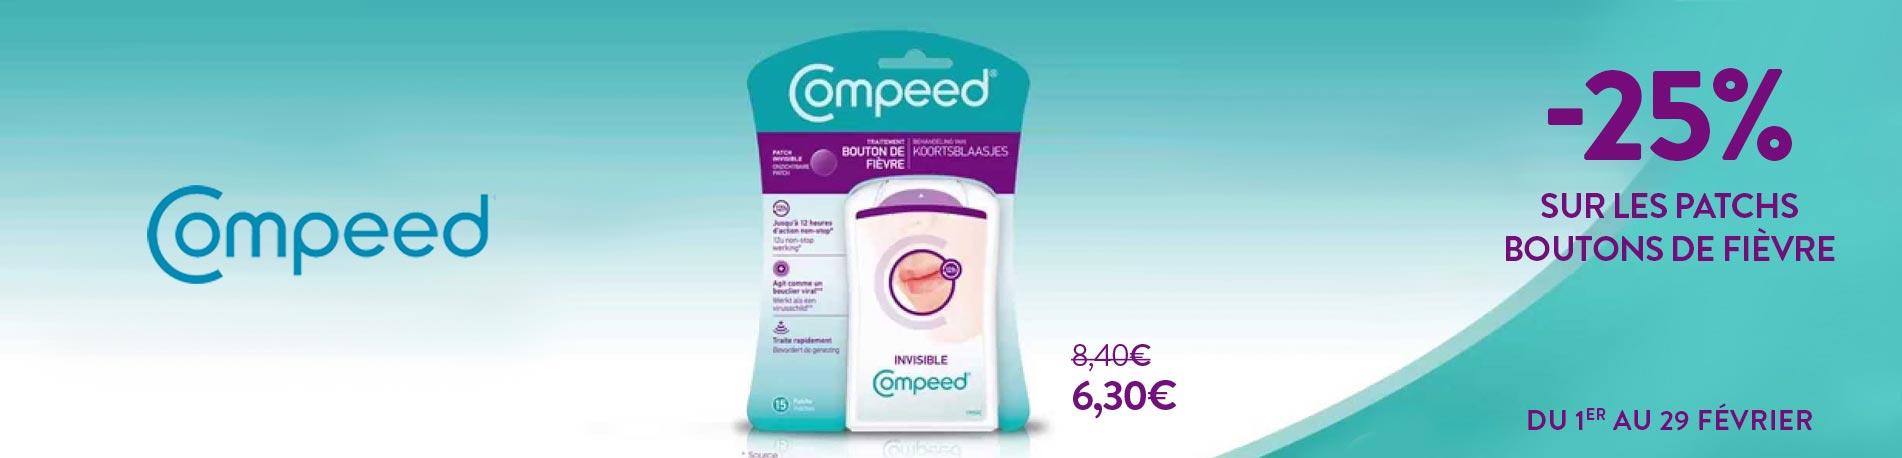 Promotion Compeed